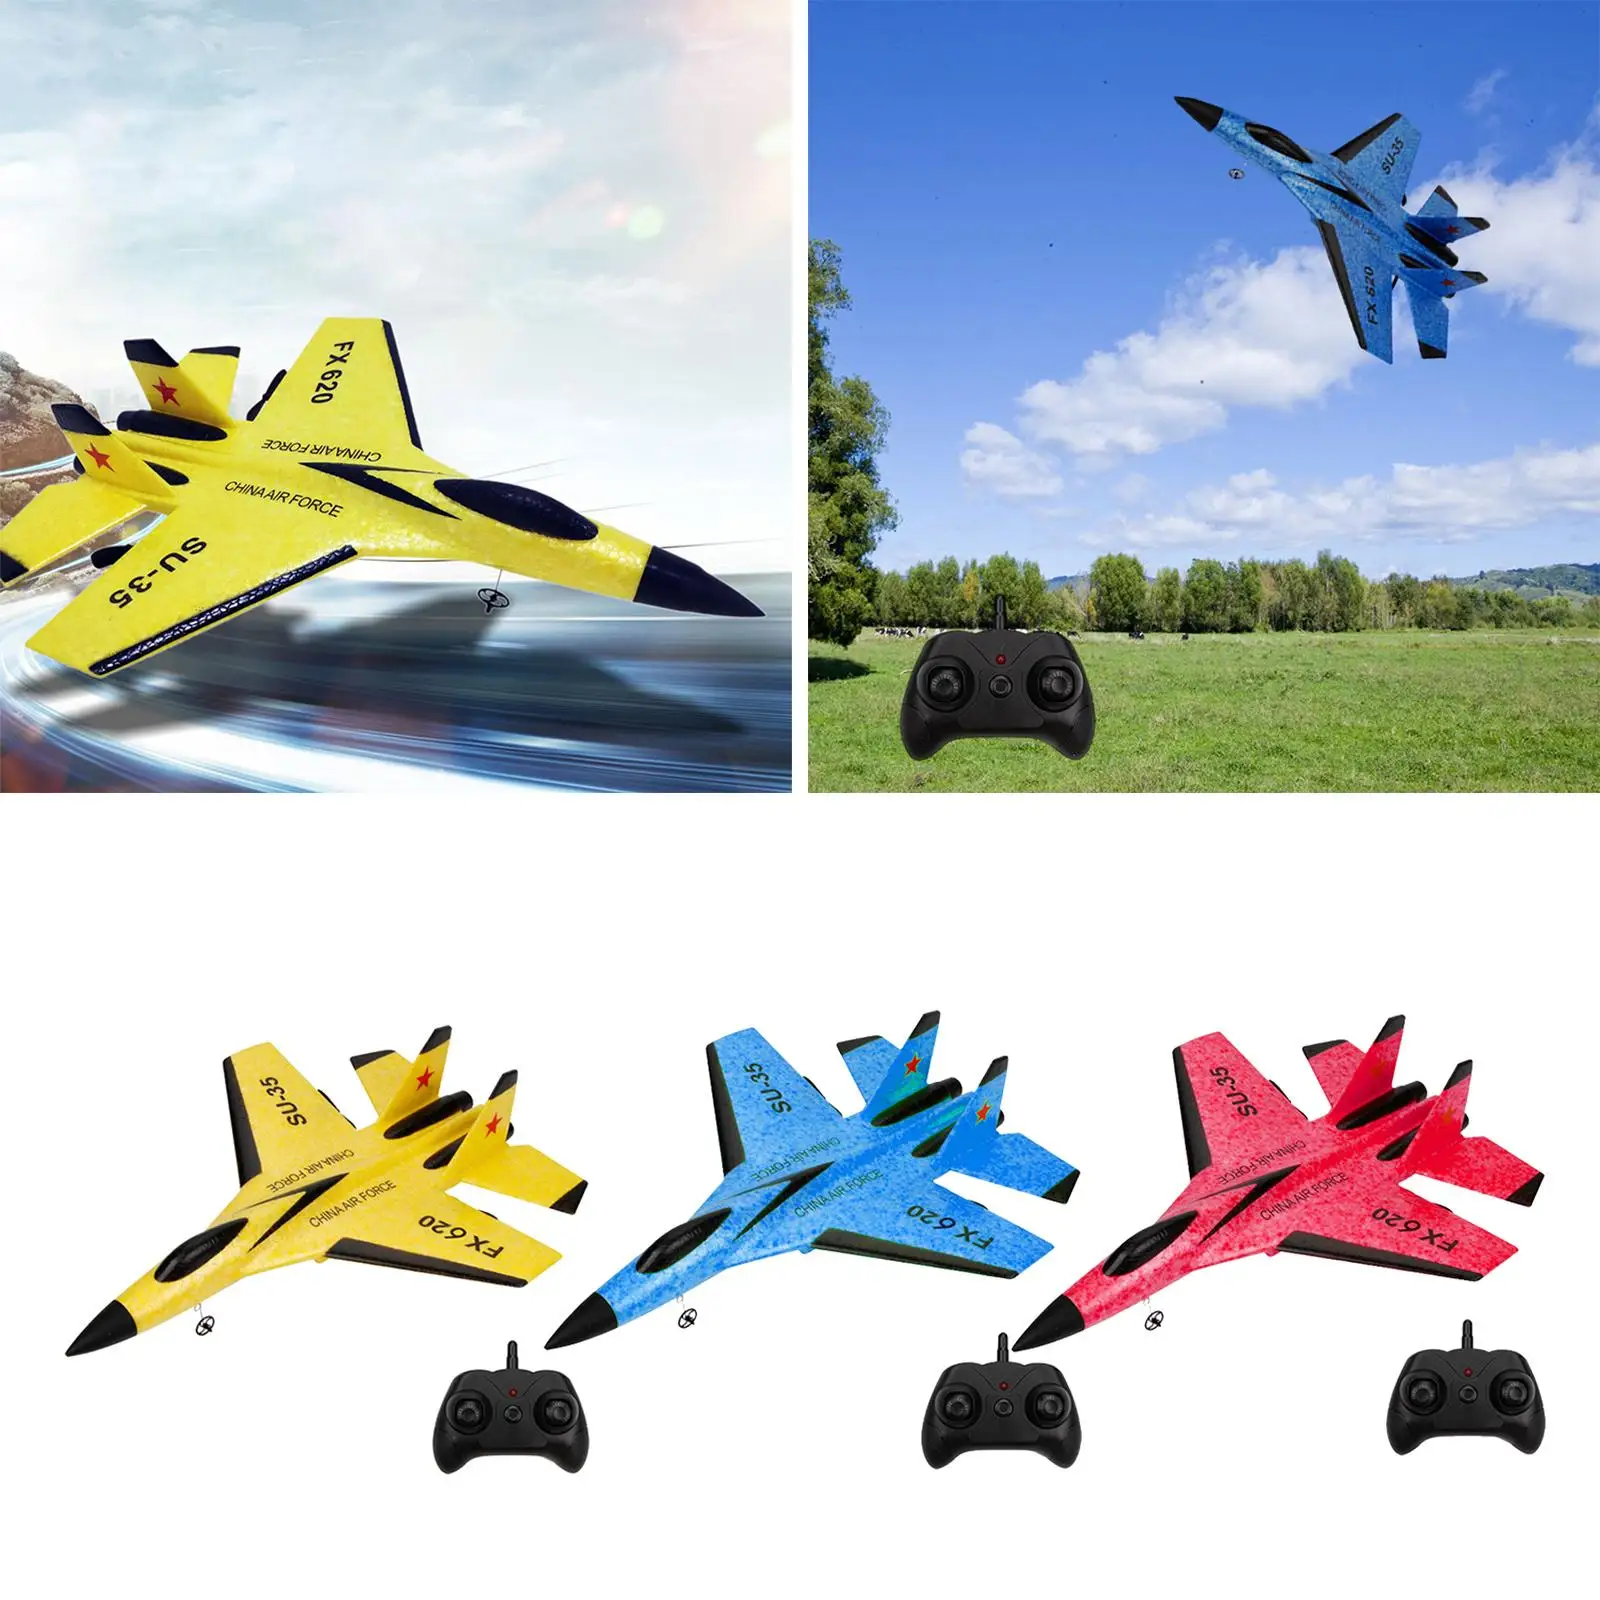 2.4G 2CH Remote Control Aircraft Christmas Gifts Outdoor Toy for Boys Kids